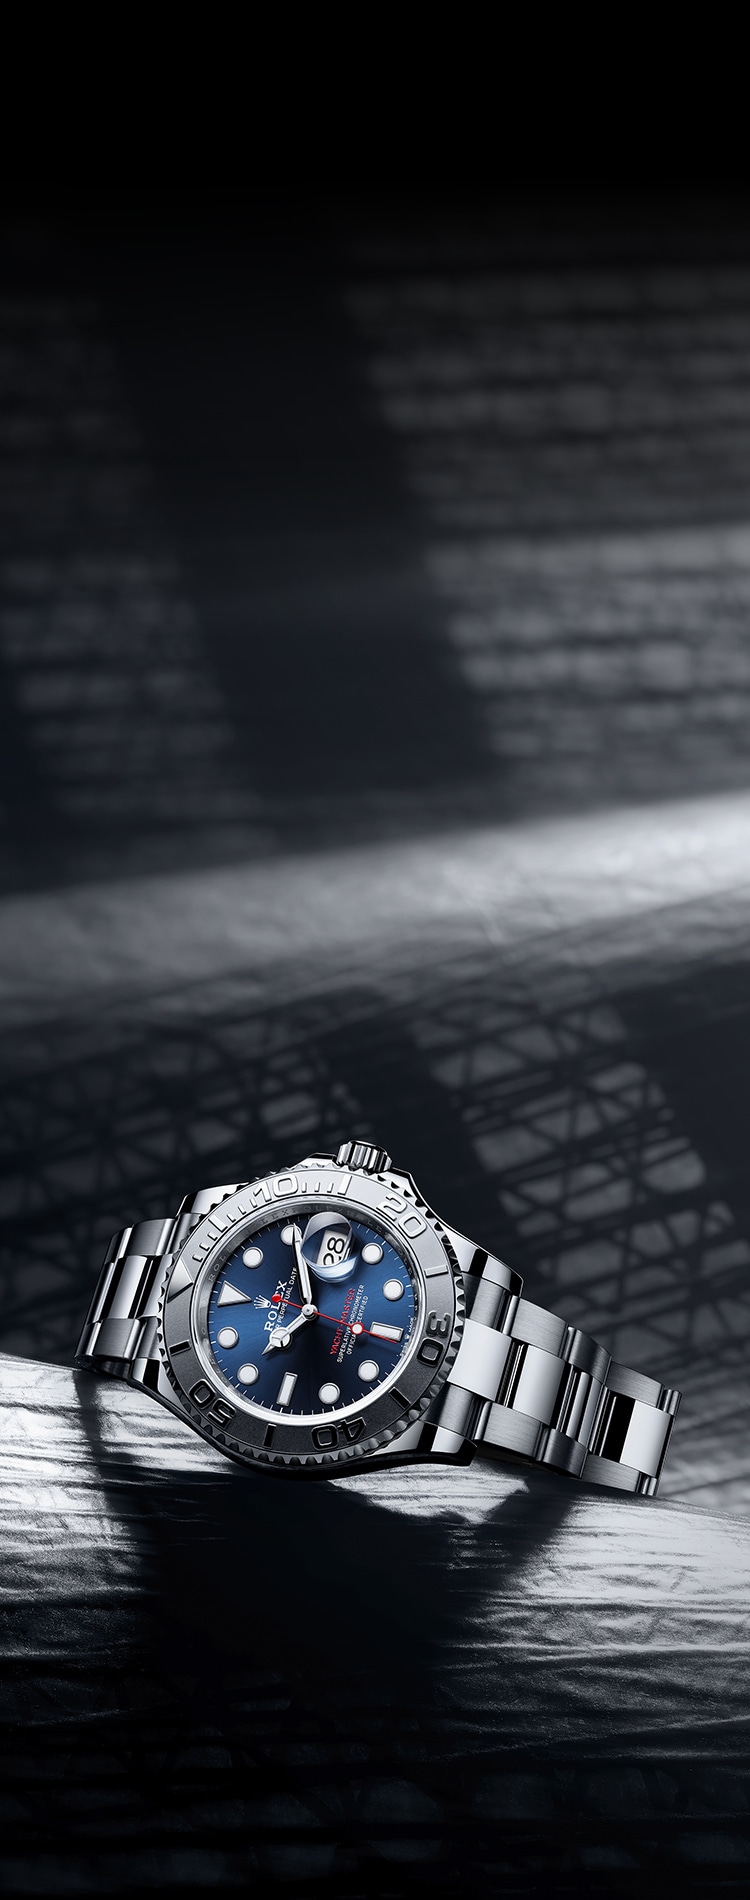 Rolex Yacht-Master - The Watch of the 